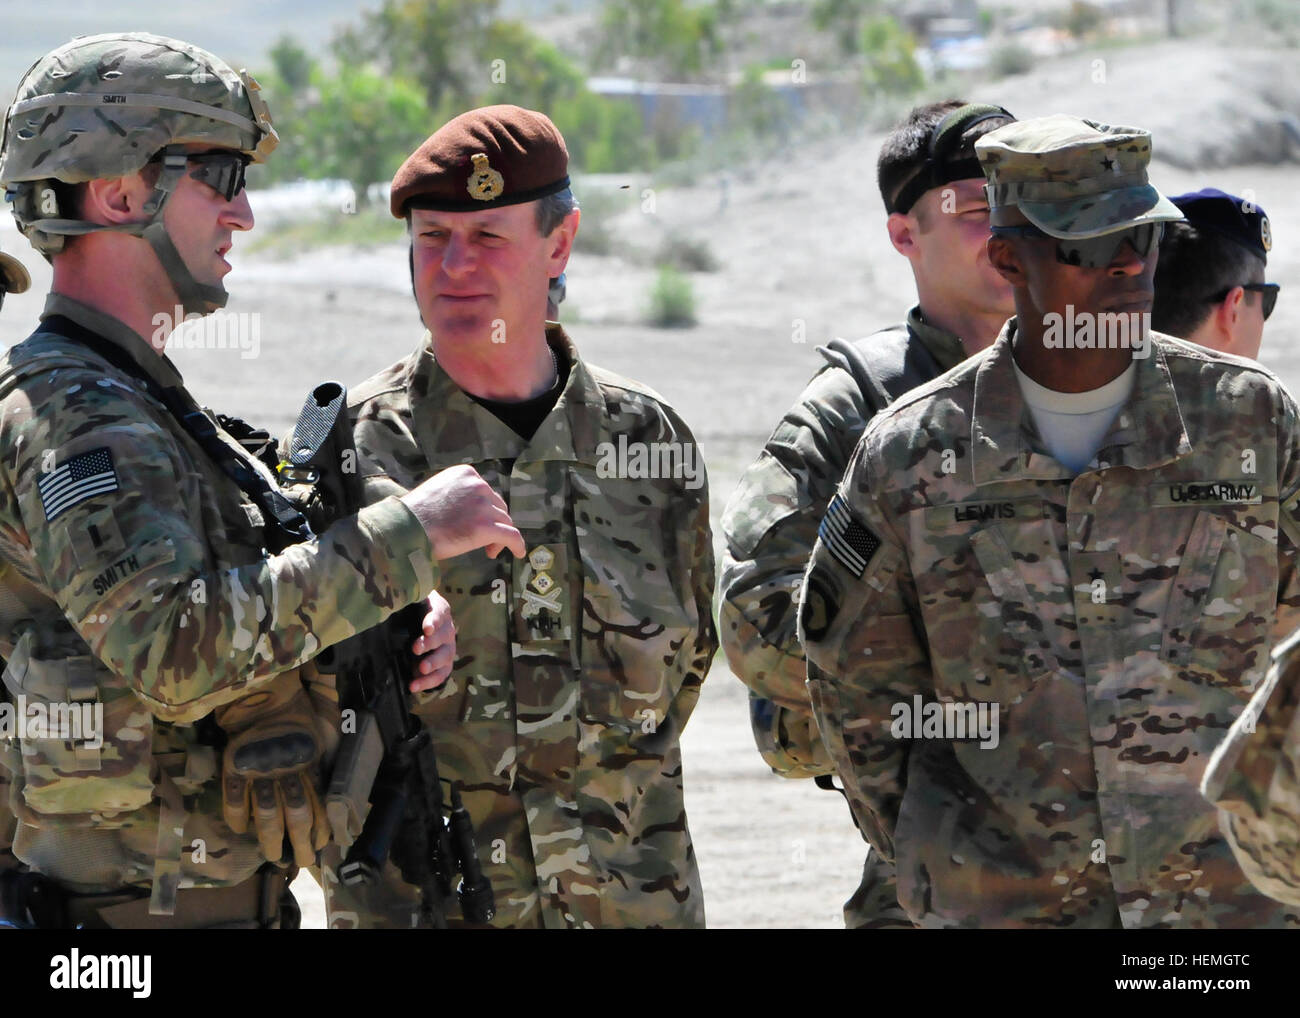 From left, U.S. Army 1st Lt. Colin Smith with the 744th Ordnance Company, 184th Ordnance Battalion, 52nd Ordnance Group, briefs British Army Gen. Sir Richard Shirreff, NATO's Deputy Supreme Allied Commander Europe, and U.S. Army Brig. Gen. Ronald Lewis, the 101st Airborne Division's deputy commanding general for support, as they observe counter-improvised explosive device awareness training at Forward Operating Base Gamberi in Laghman province, Afghanistan, April 16, 2013.  (U.S. Army photo by Staff Sgt. Richard Andrade/Released) Deputy Supreme Allied Commander Europe visits FOB Gamberi 130421 Stock Photo